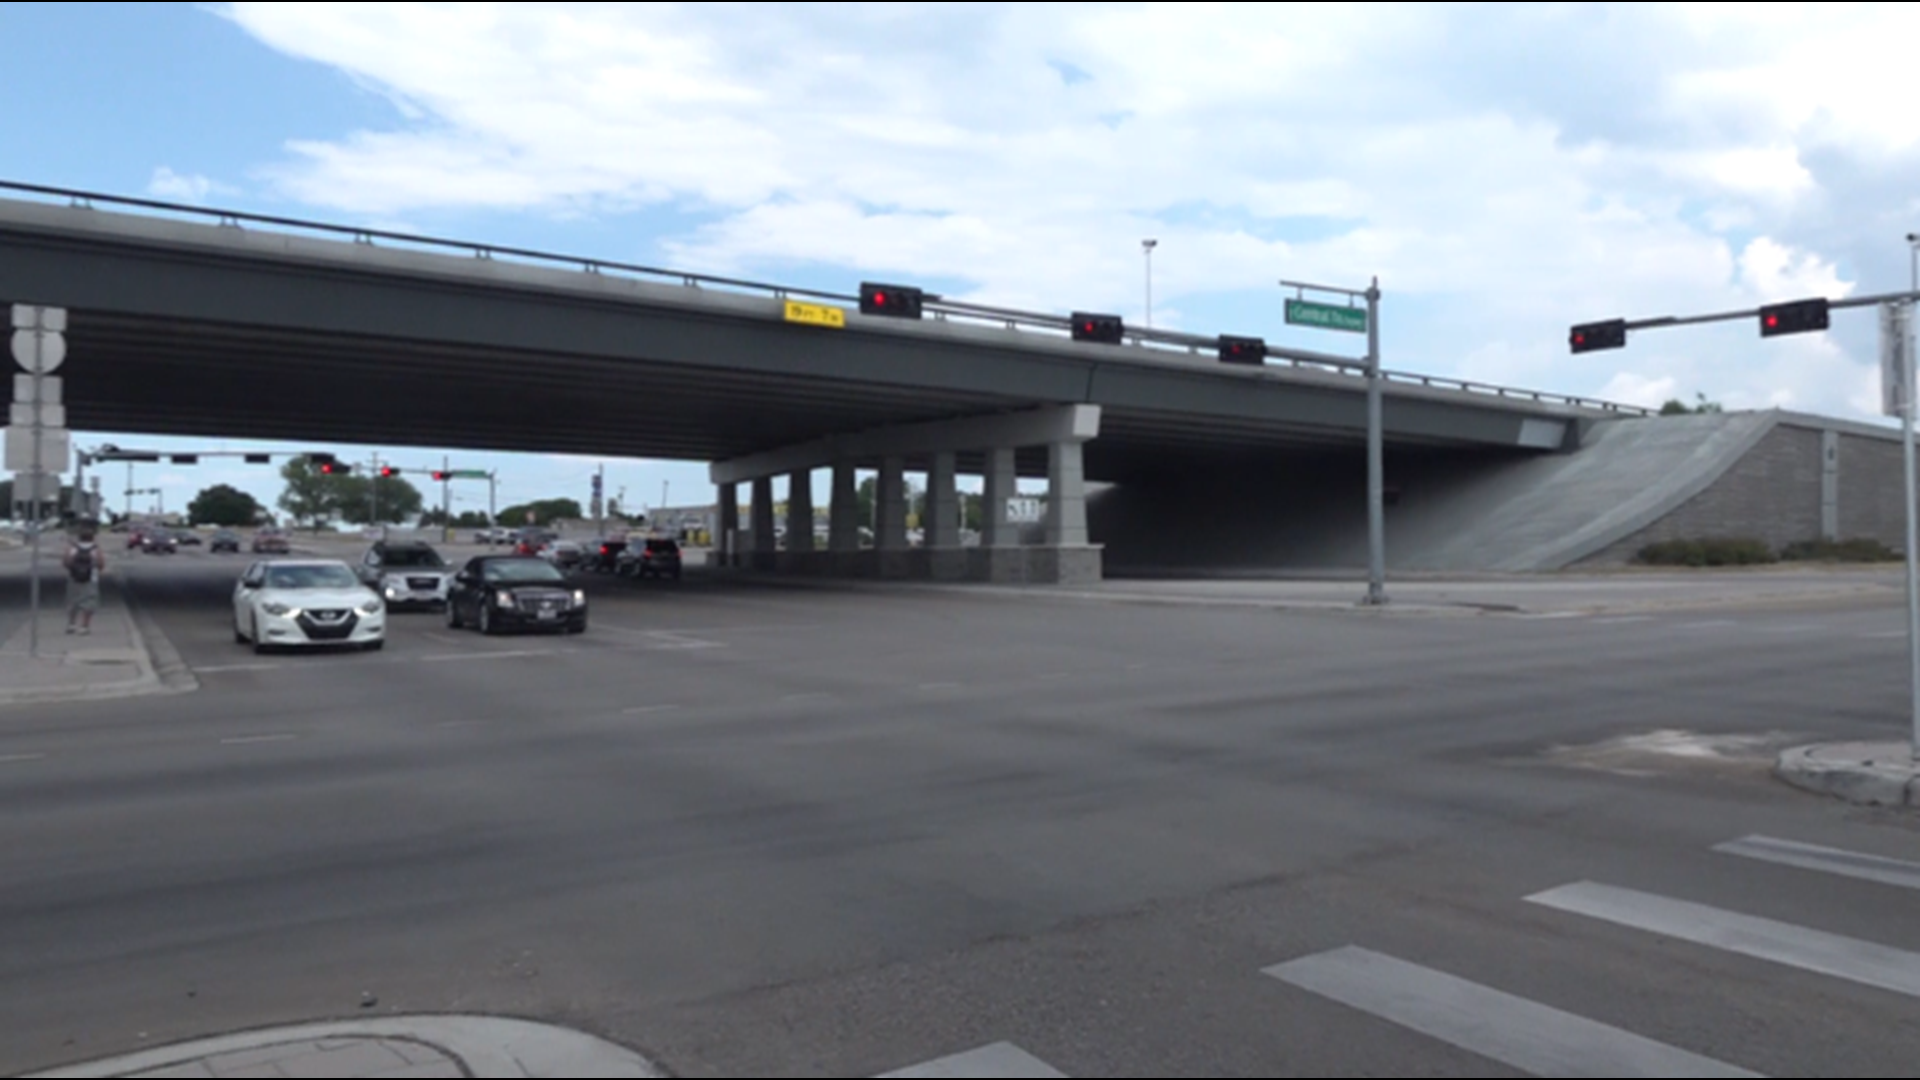 The Killeen intersection that has seen 60 crashes since 2017 could now see some changes following an engineering study.